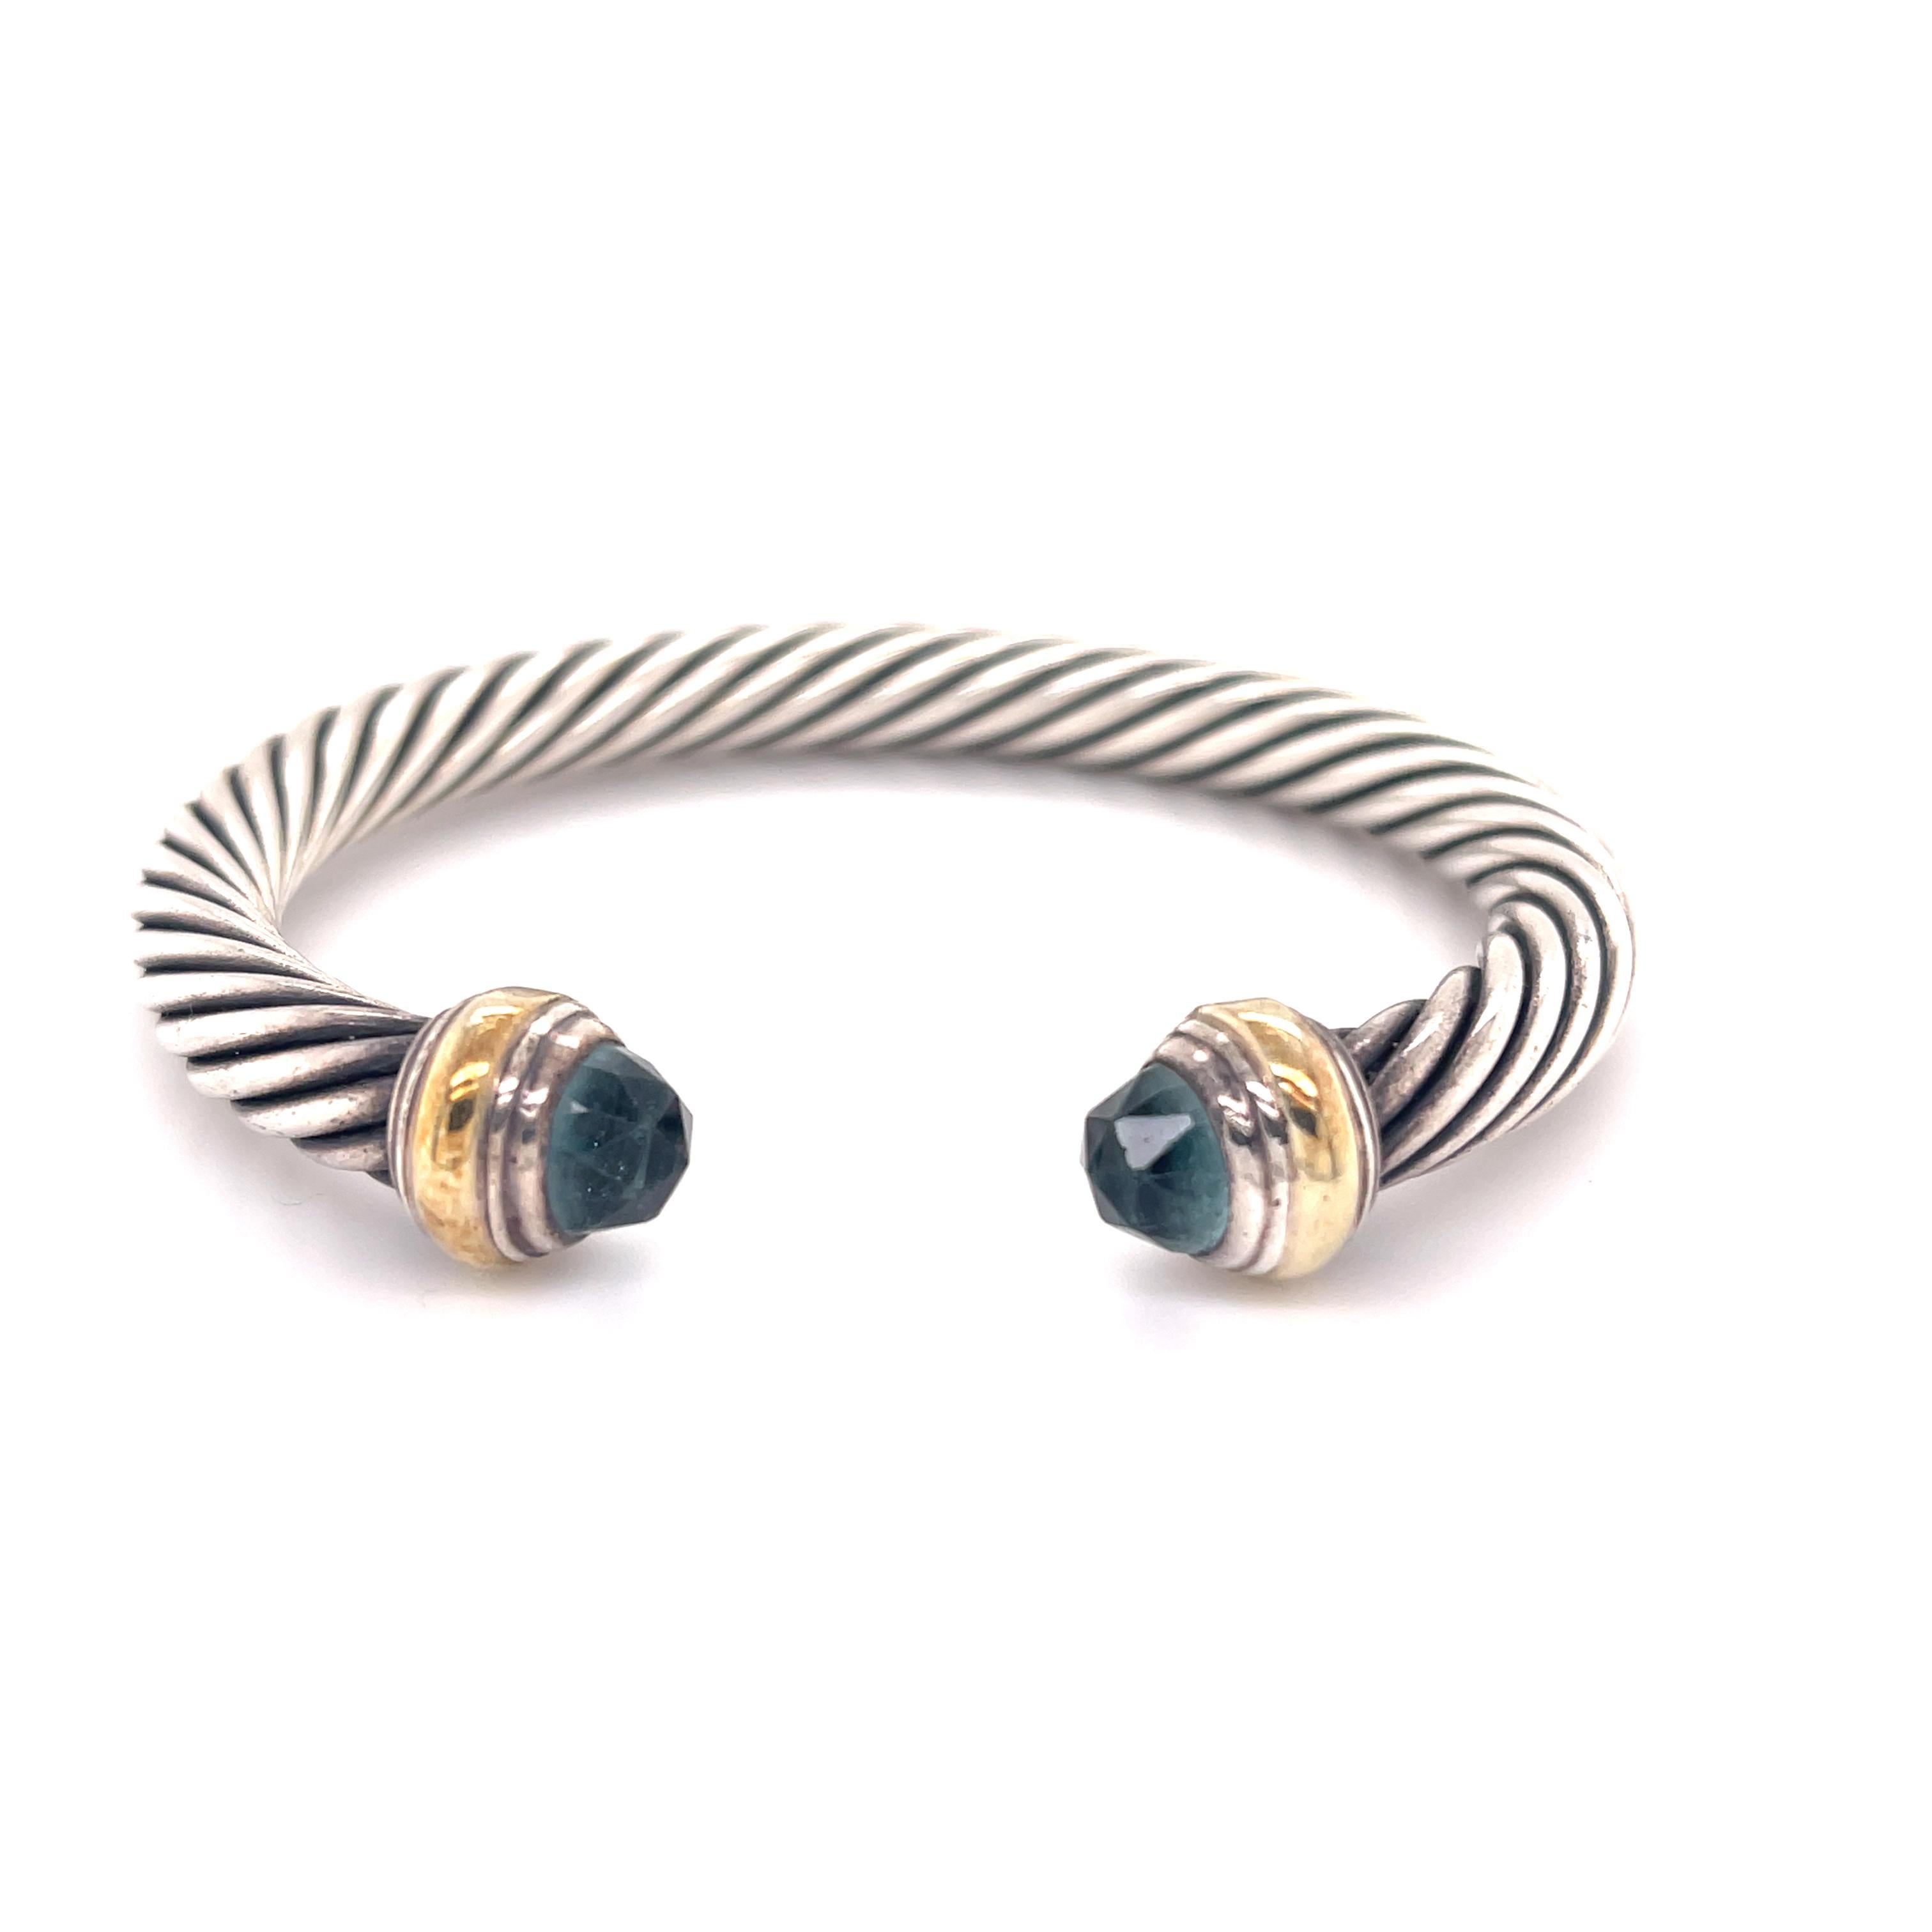 One lady's designer made brush finished, textured, silver and 14K yellow gold, blue topaz bangle, cuff bracelet. The bracelet measures approximately 6.00 inches in length tapering to 5.00mm in width and weighs a total of 41.90 grams. Engraved with